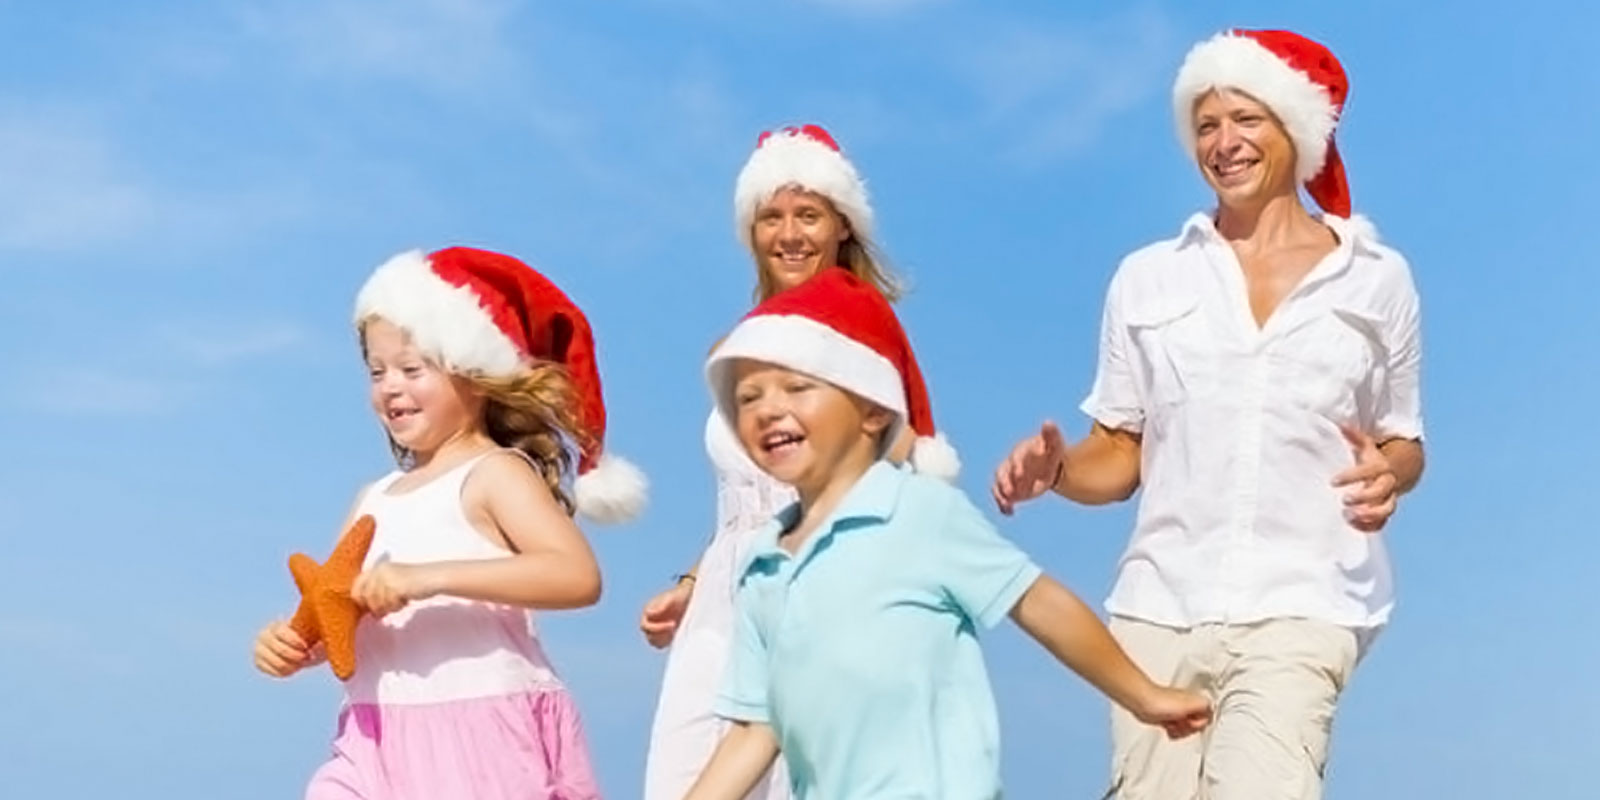 Plan For A Safe Christmas Vacation With These Travel Tips